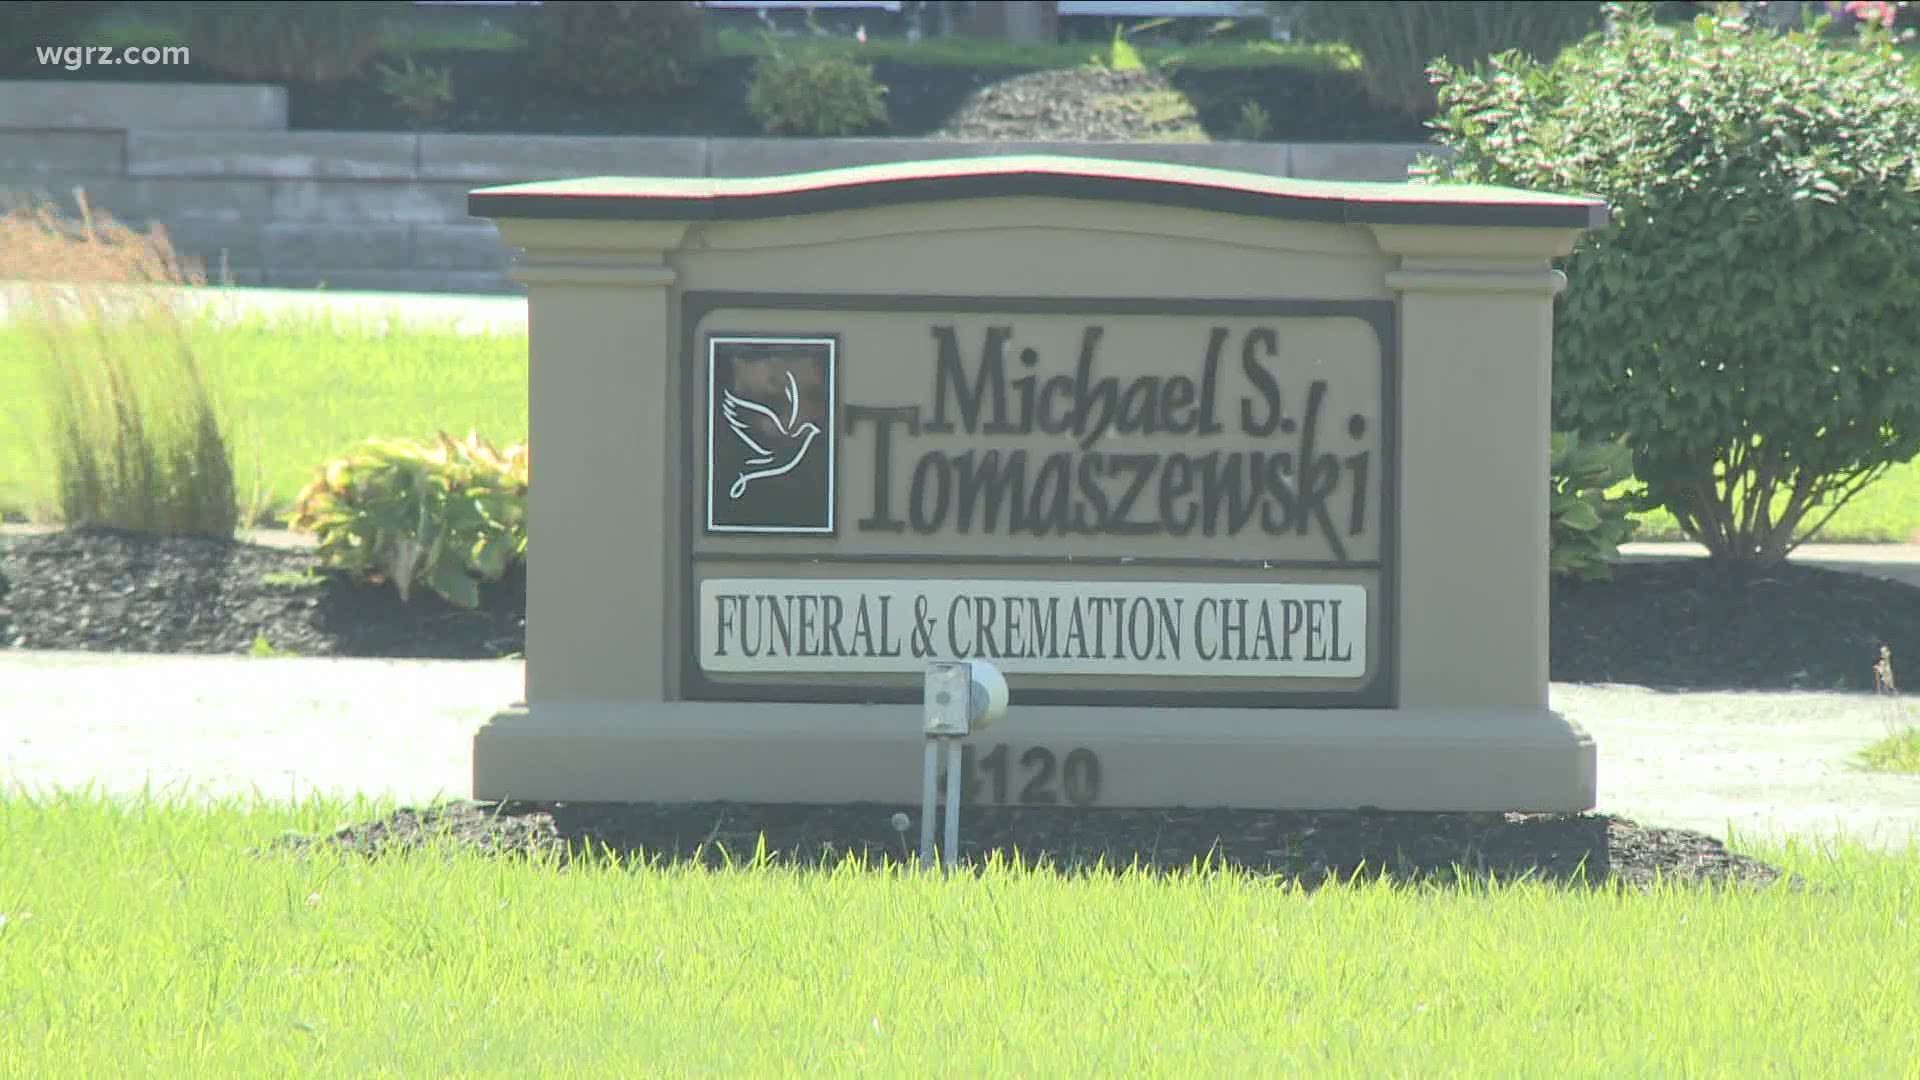 The investigation continues tonight into a Batavia funeral director who is facing hundreds of charges.